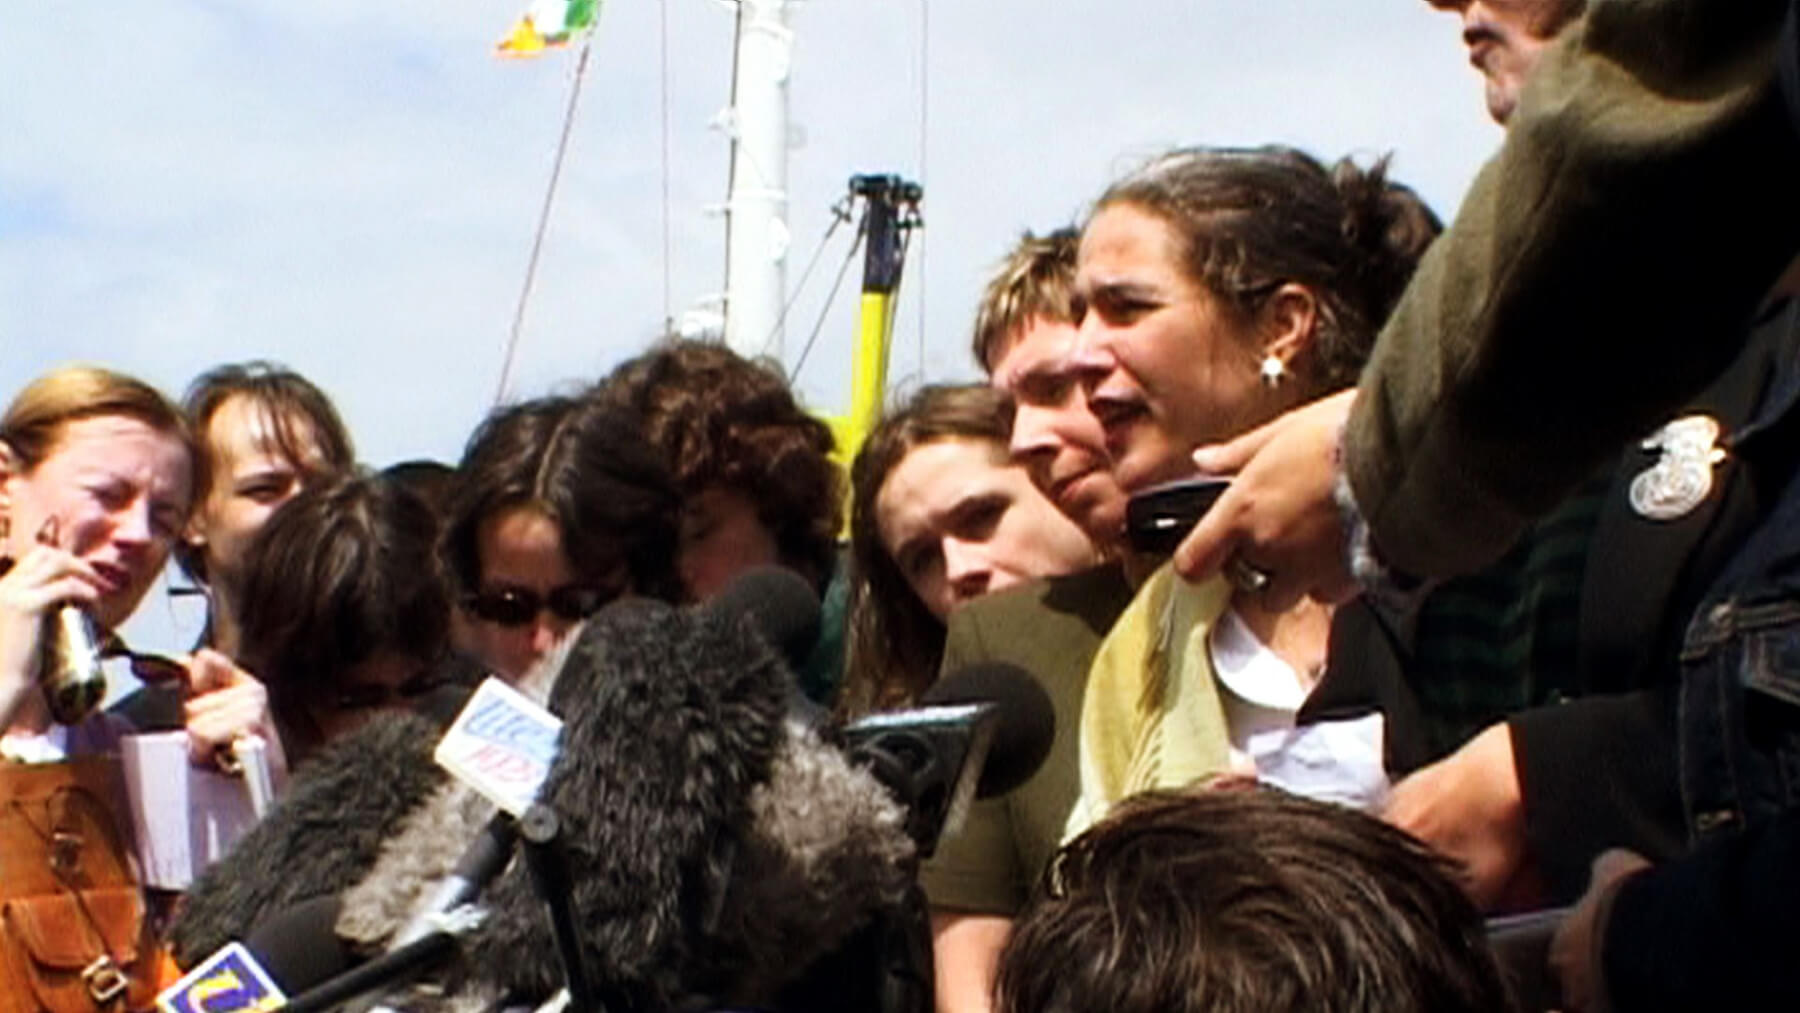 Still form Vessel. A woman is being interviewed, surrounded by microphones and other people.